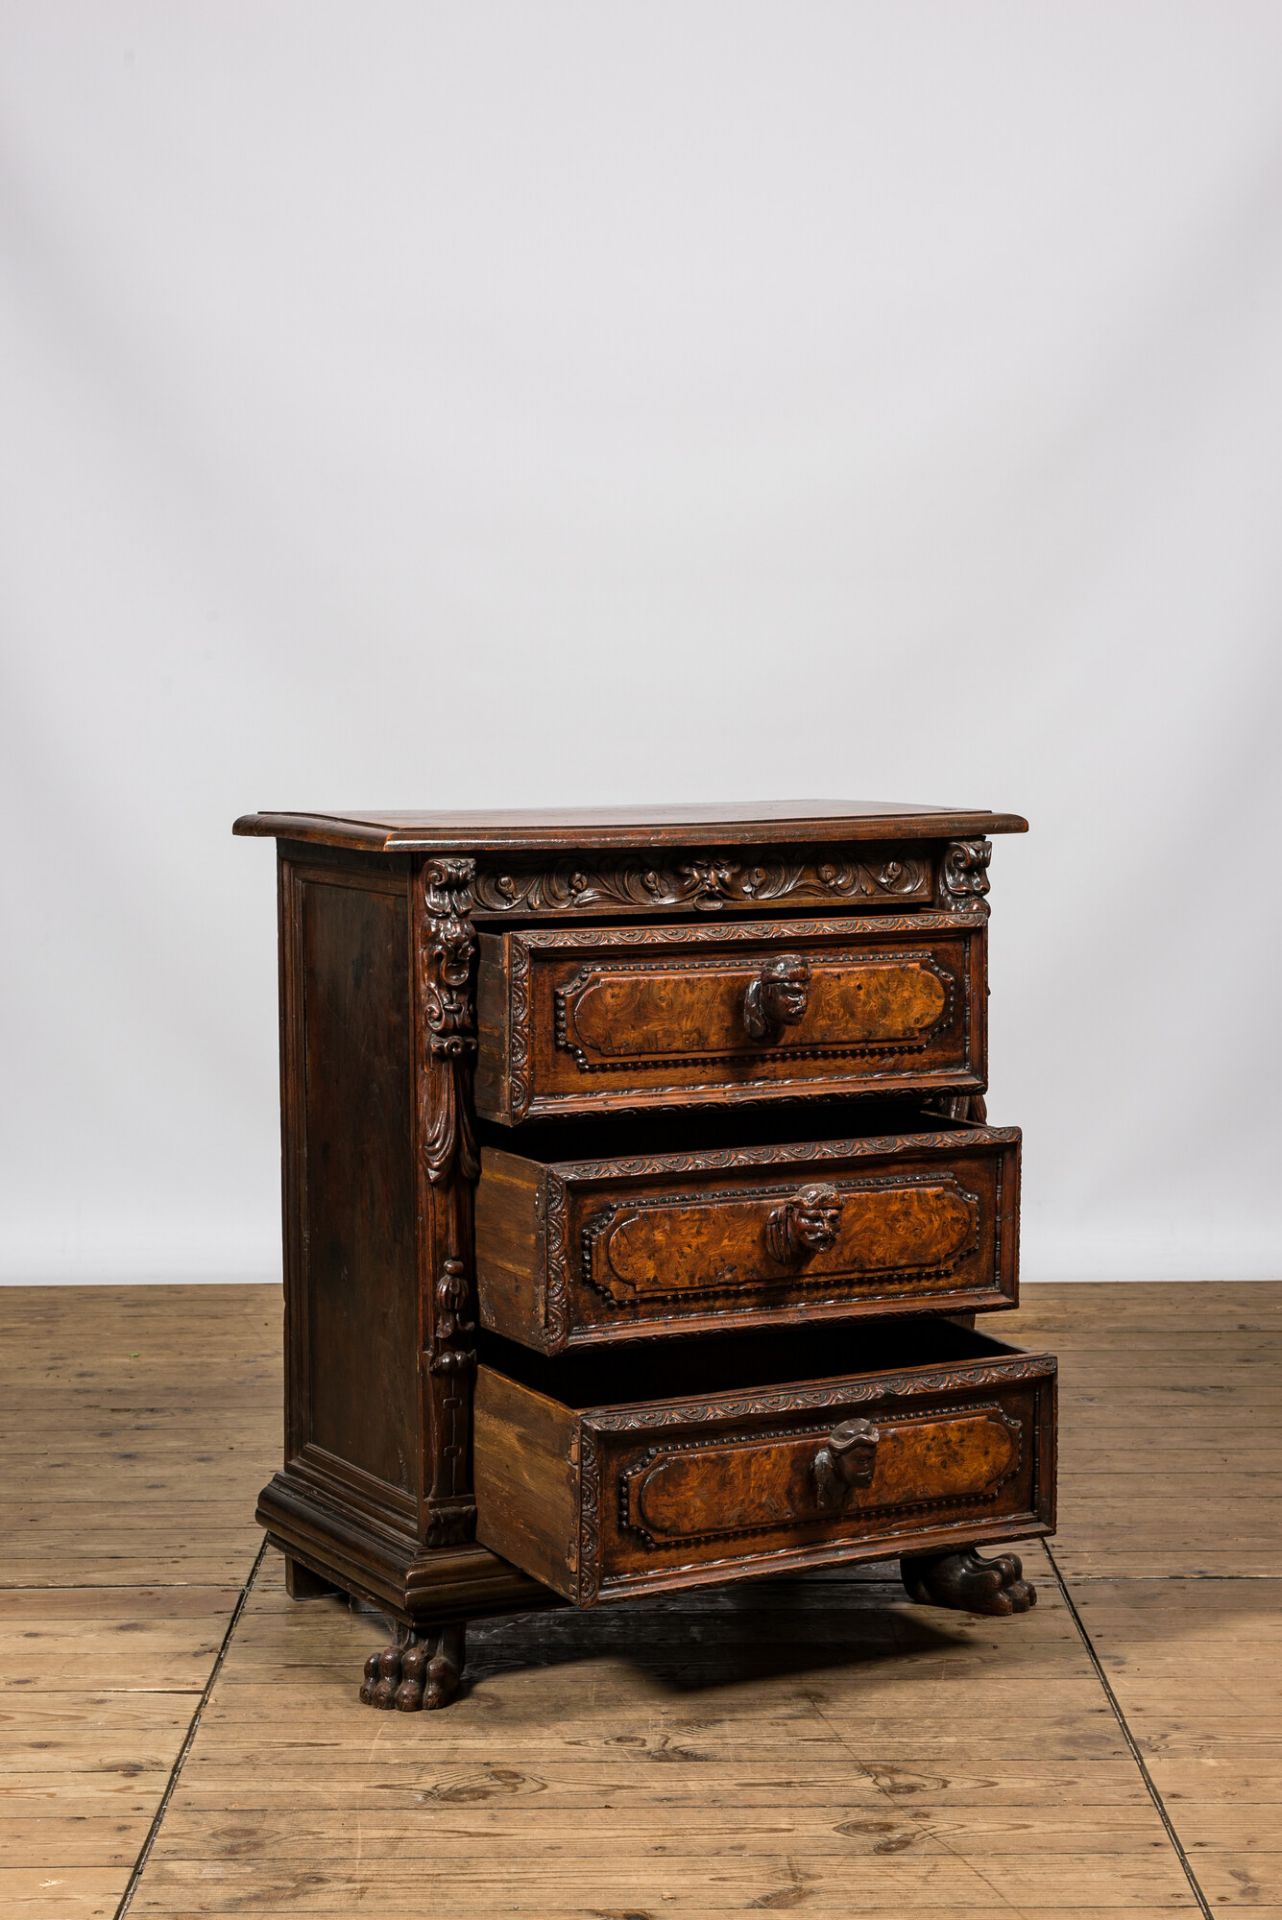 An Italian richly decorated walnut and burl wood chest of drawers with mascarons, 19th C. - Bild 3 aus 3